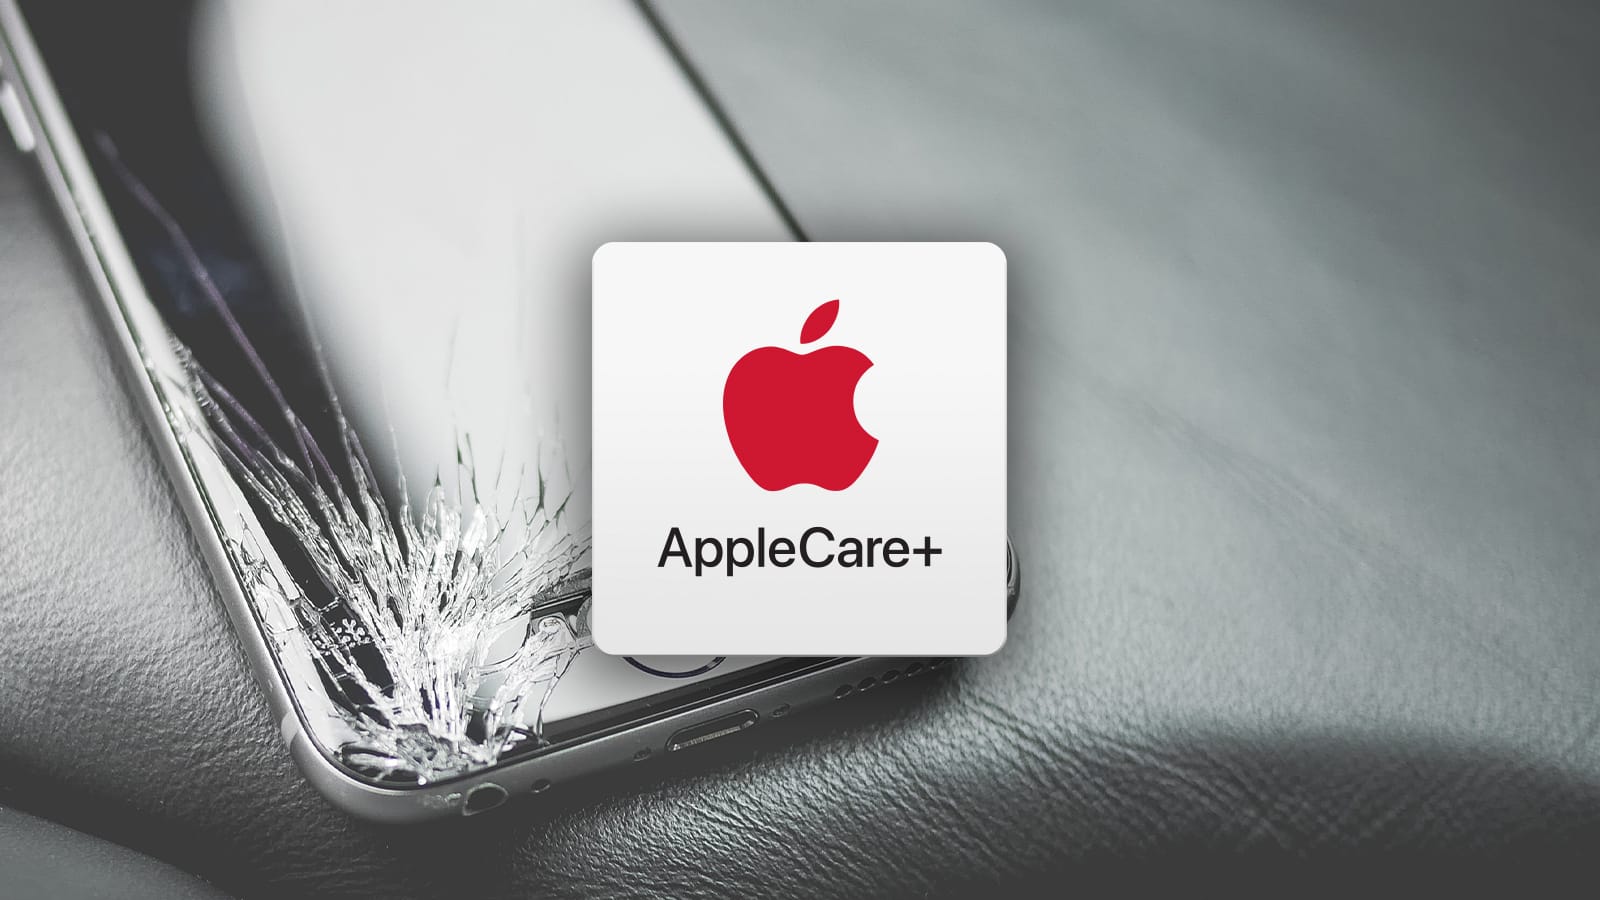 can i add applecare plus after purchase